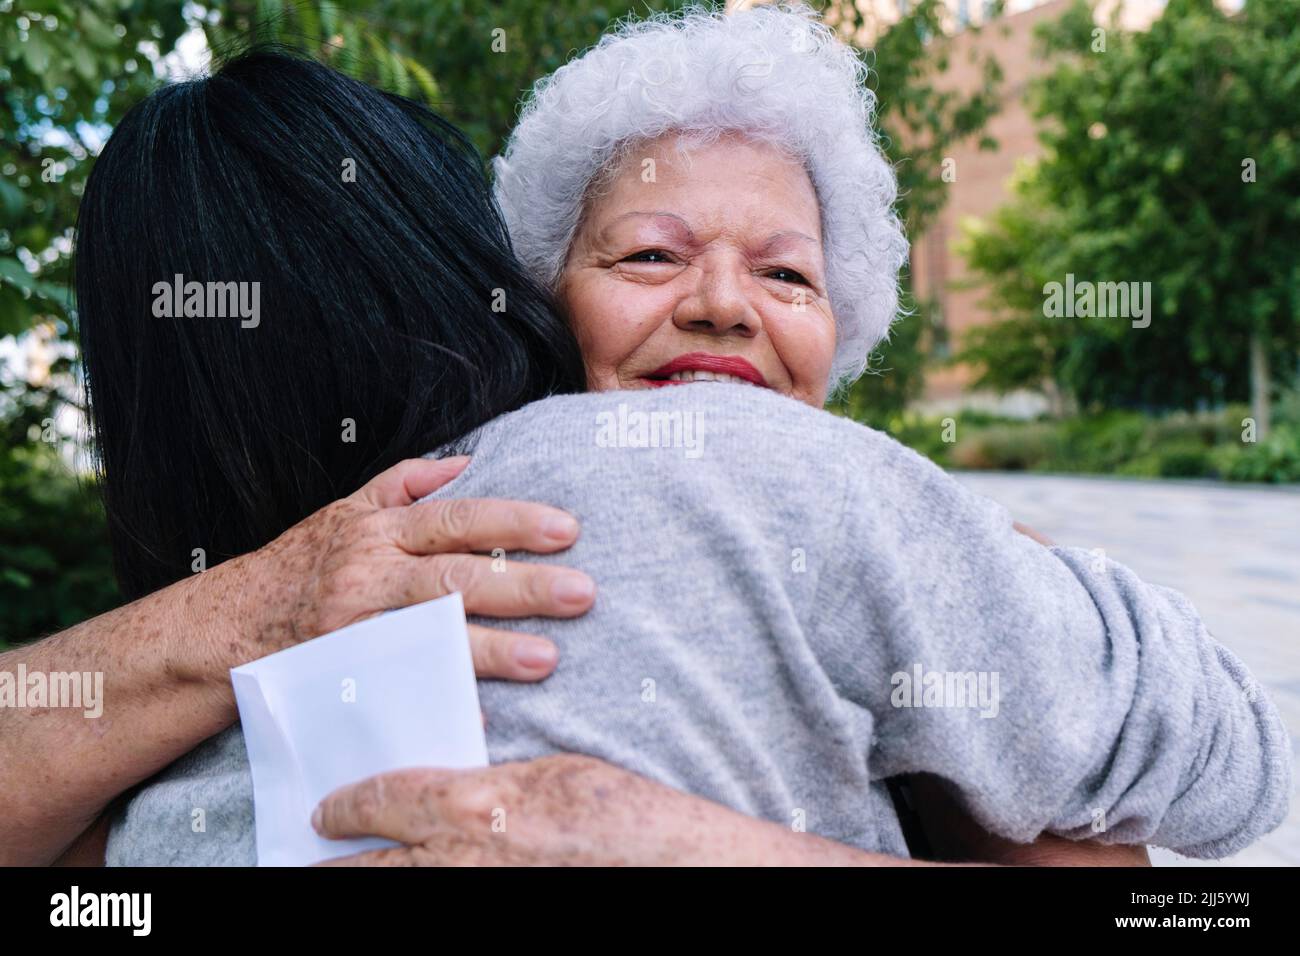 Daughter and mother hugging each other in park Stock Photo